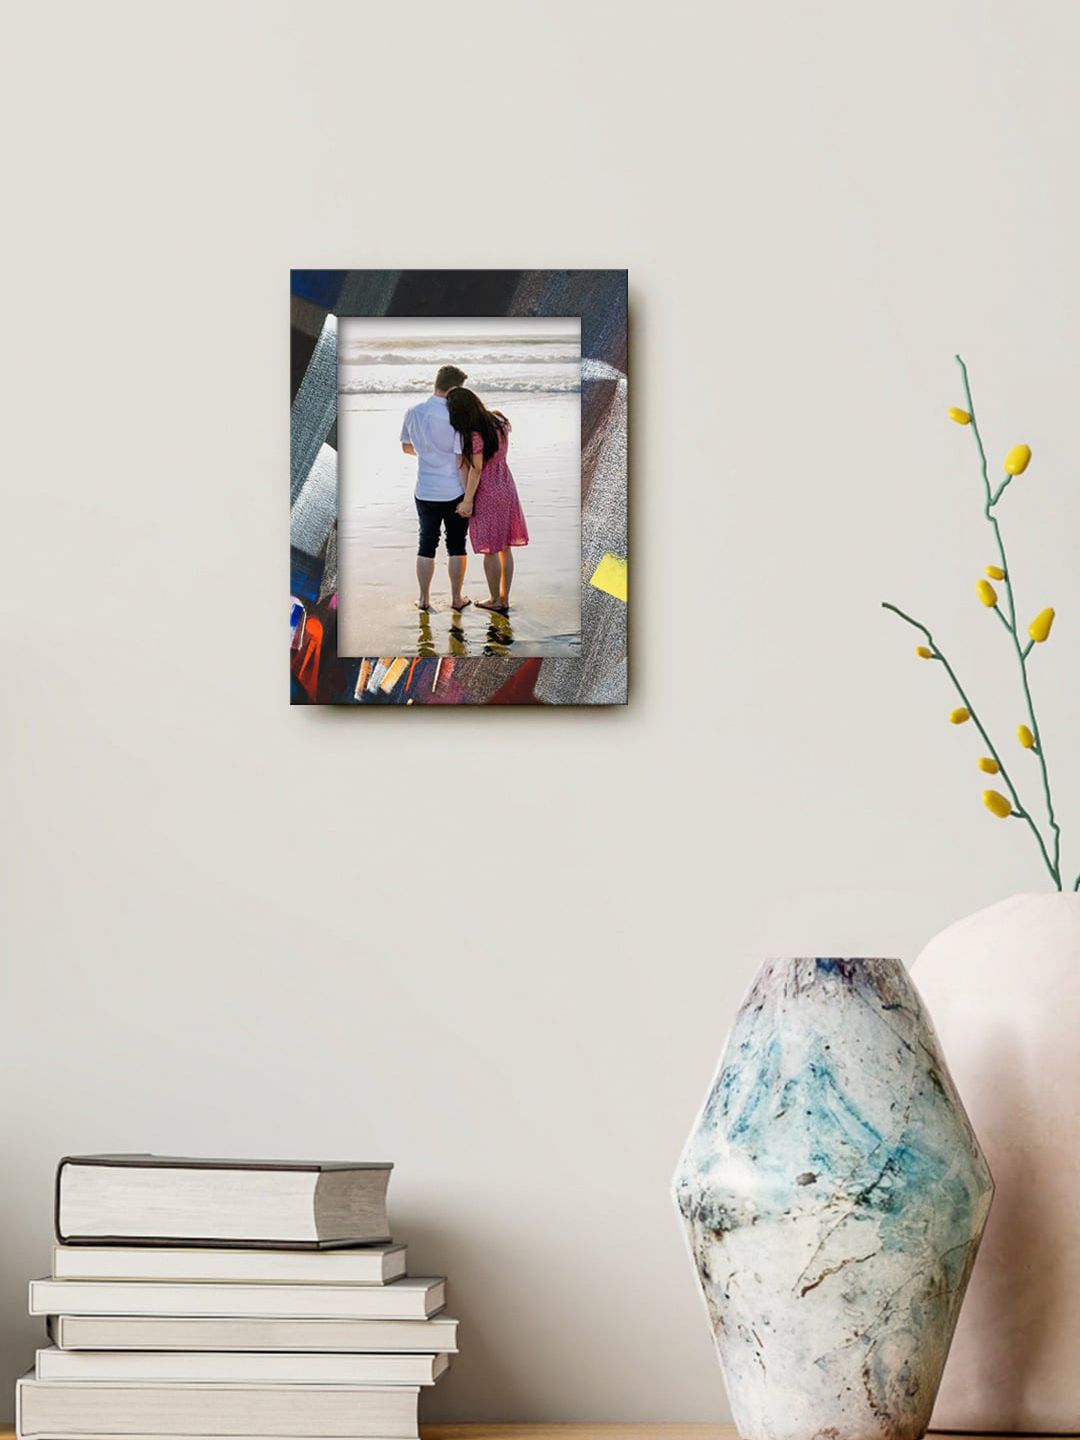 999Store Grey & Black Printed MDF Wall Photo Frame Price in India